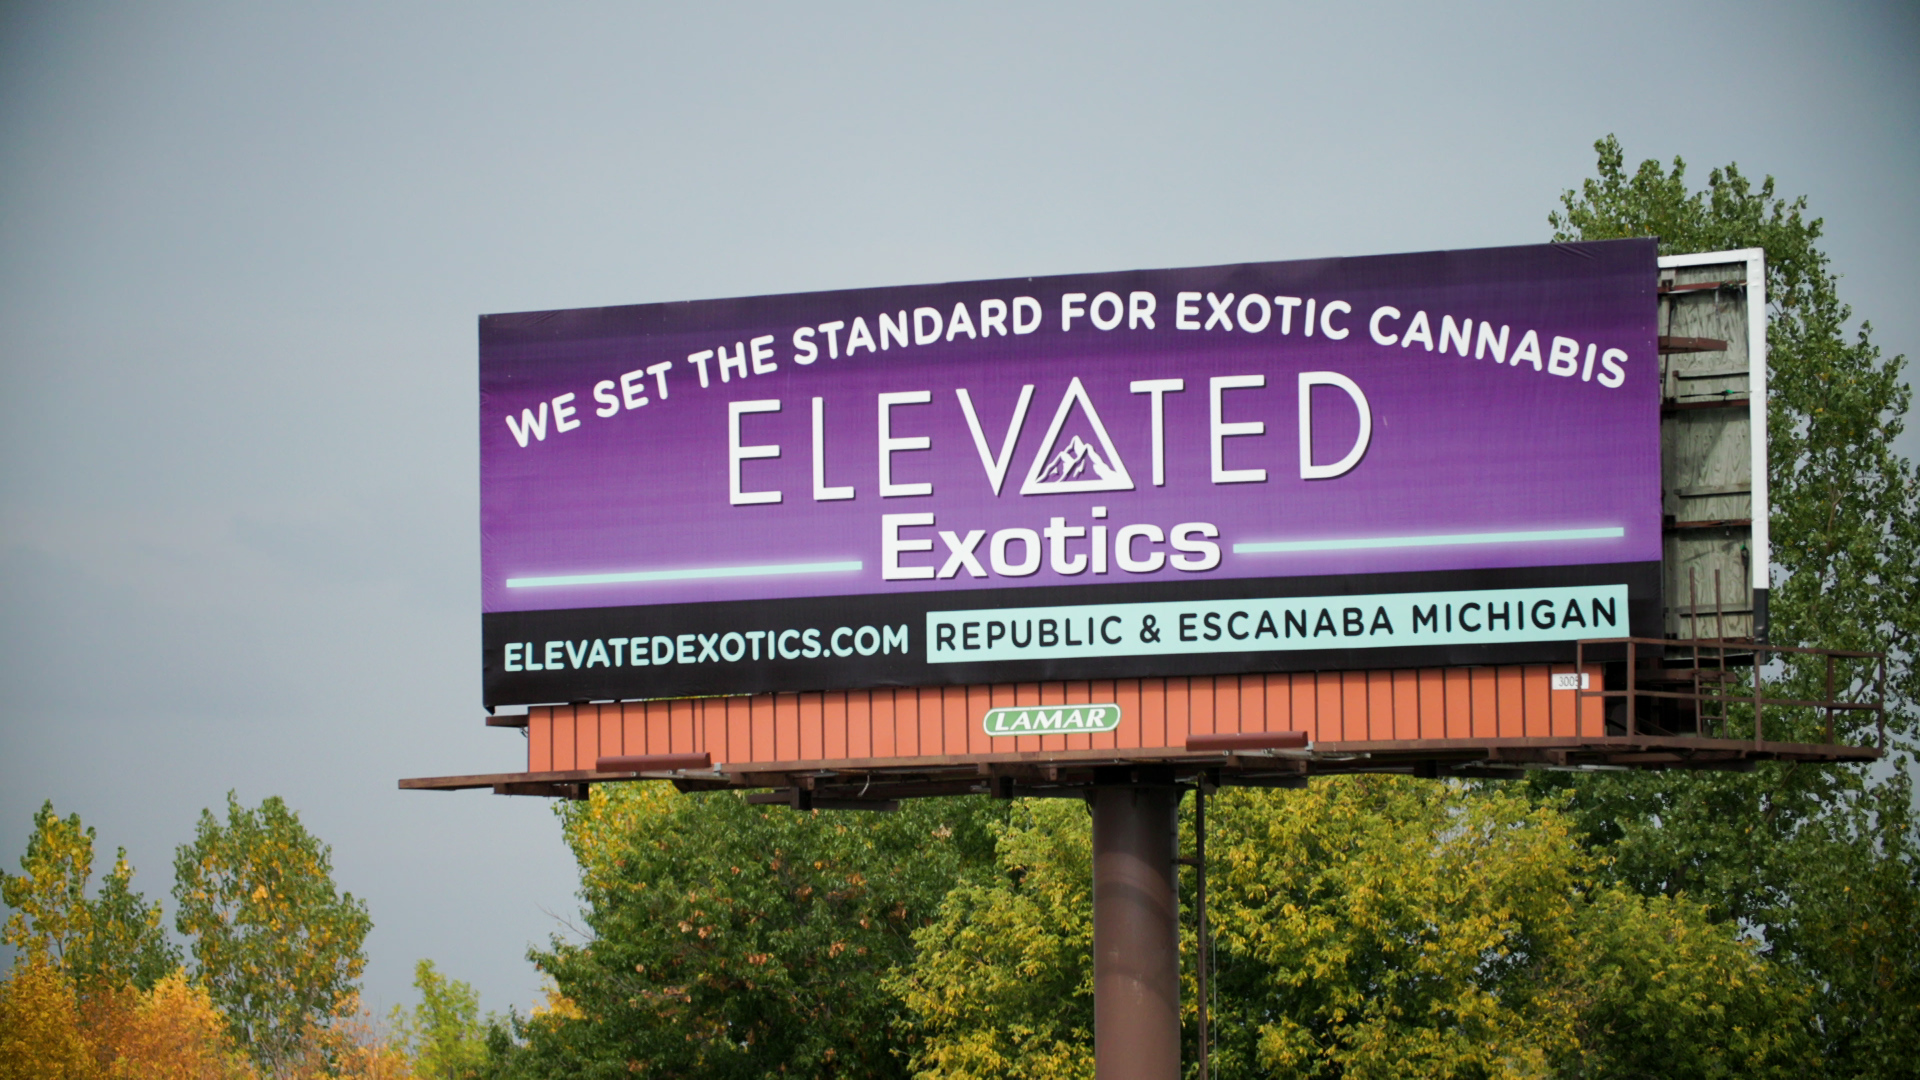 A billboard with the words "We Set the Standard for Exotic Cannabis," an "Elevated Exotics" marijuana dispensary logo with a mountain logo in the middle of the "A," and locations of Republic and Escanaba in Michigan stands next to a highway, with trees in the background.